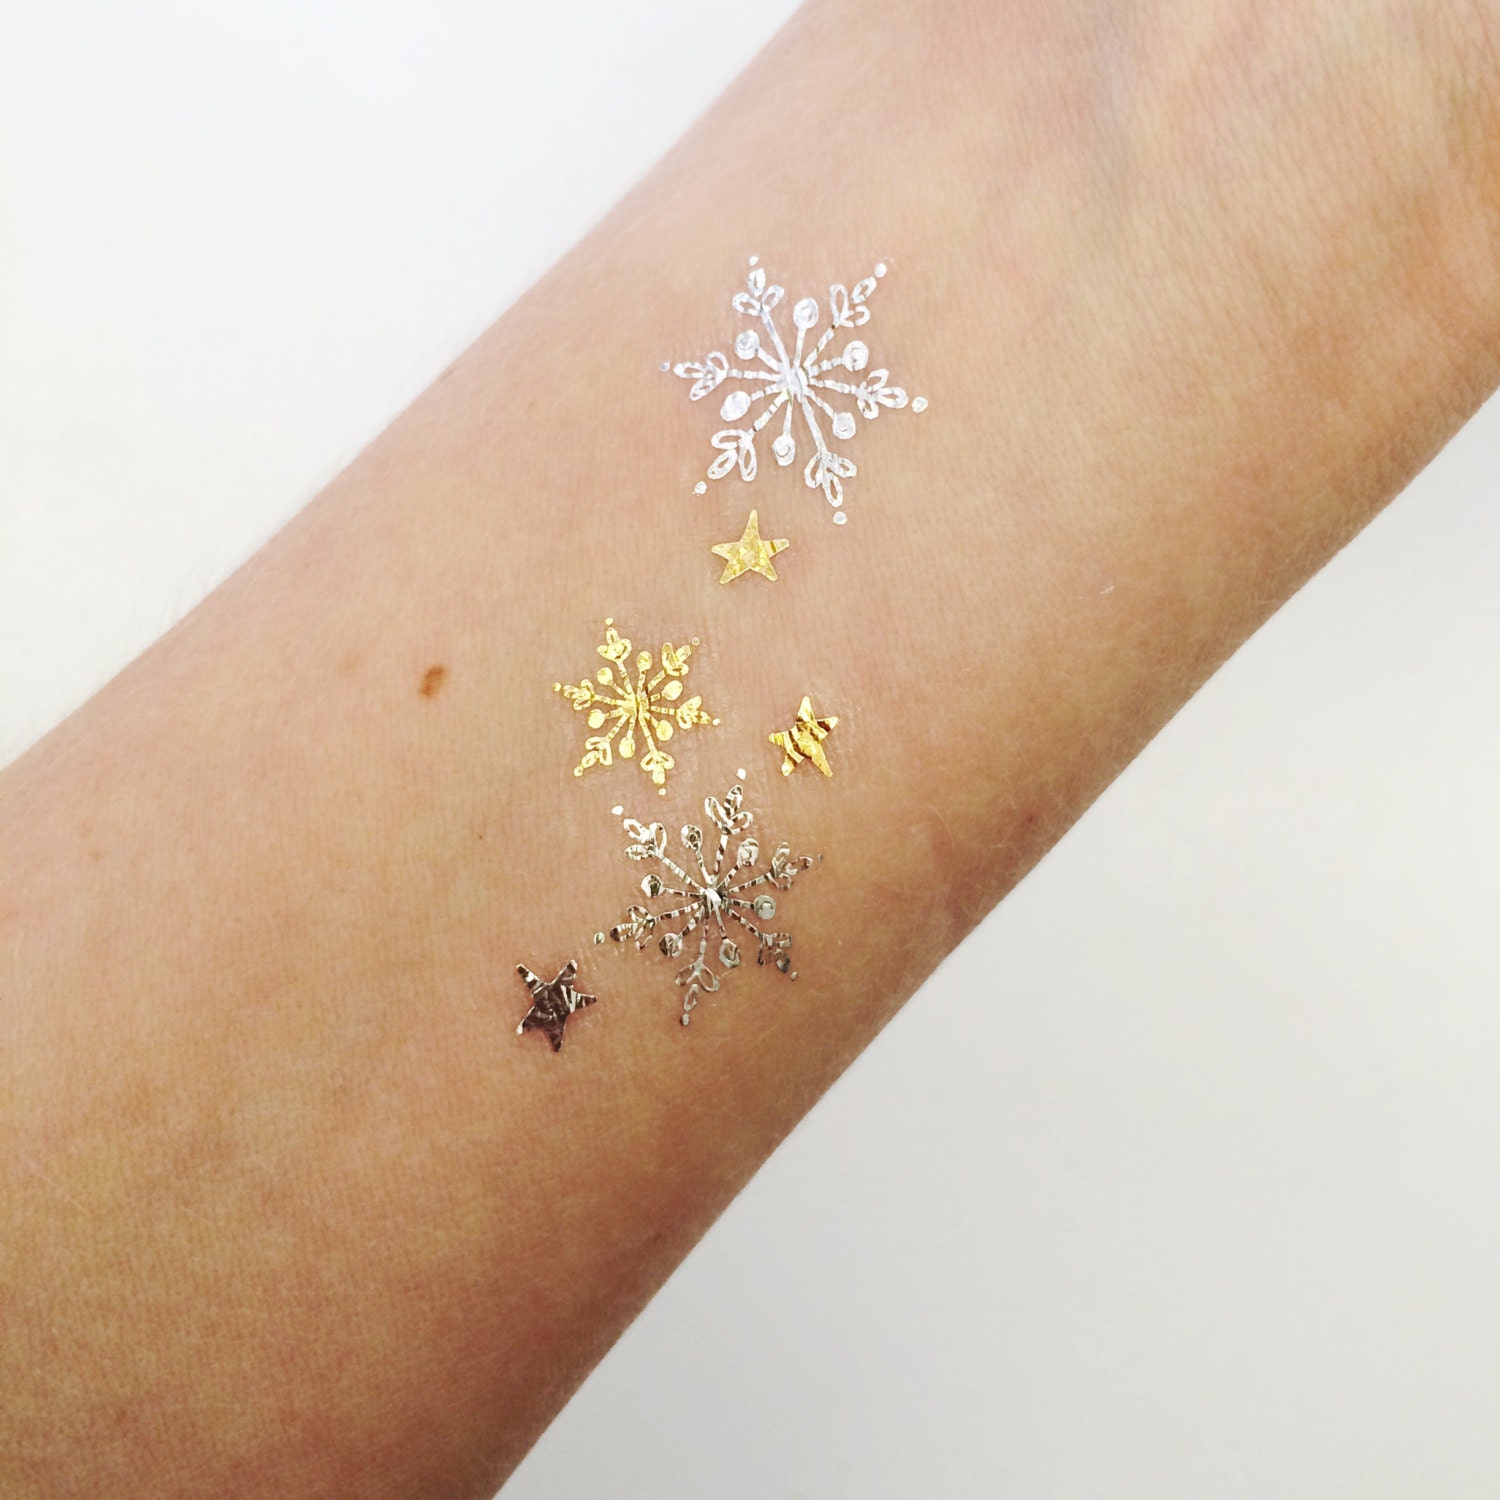 Glitter Blue and Silver Snowflake Removable Tattoos - Add Glitz to Cold  Days!